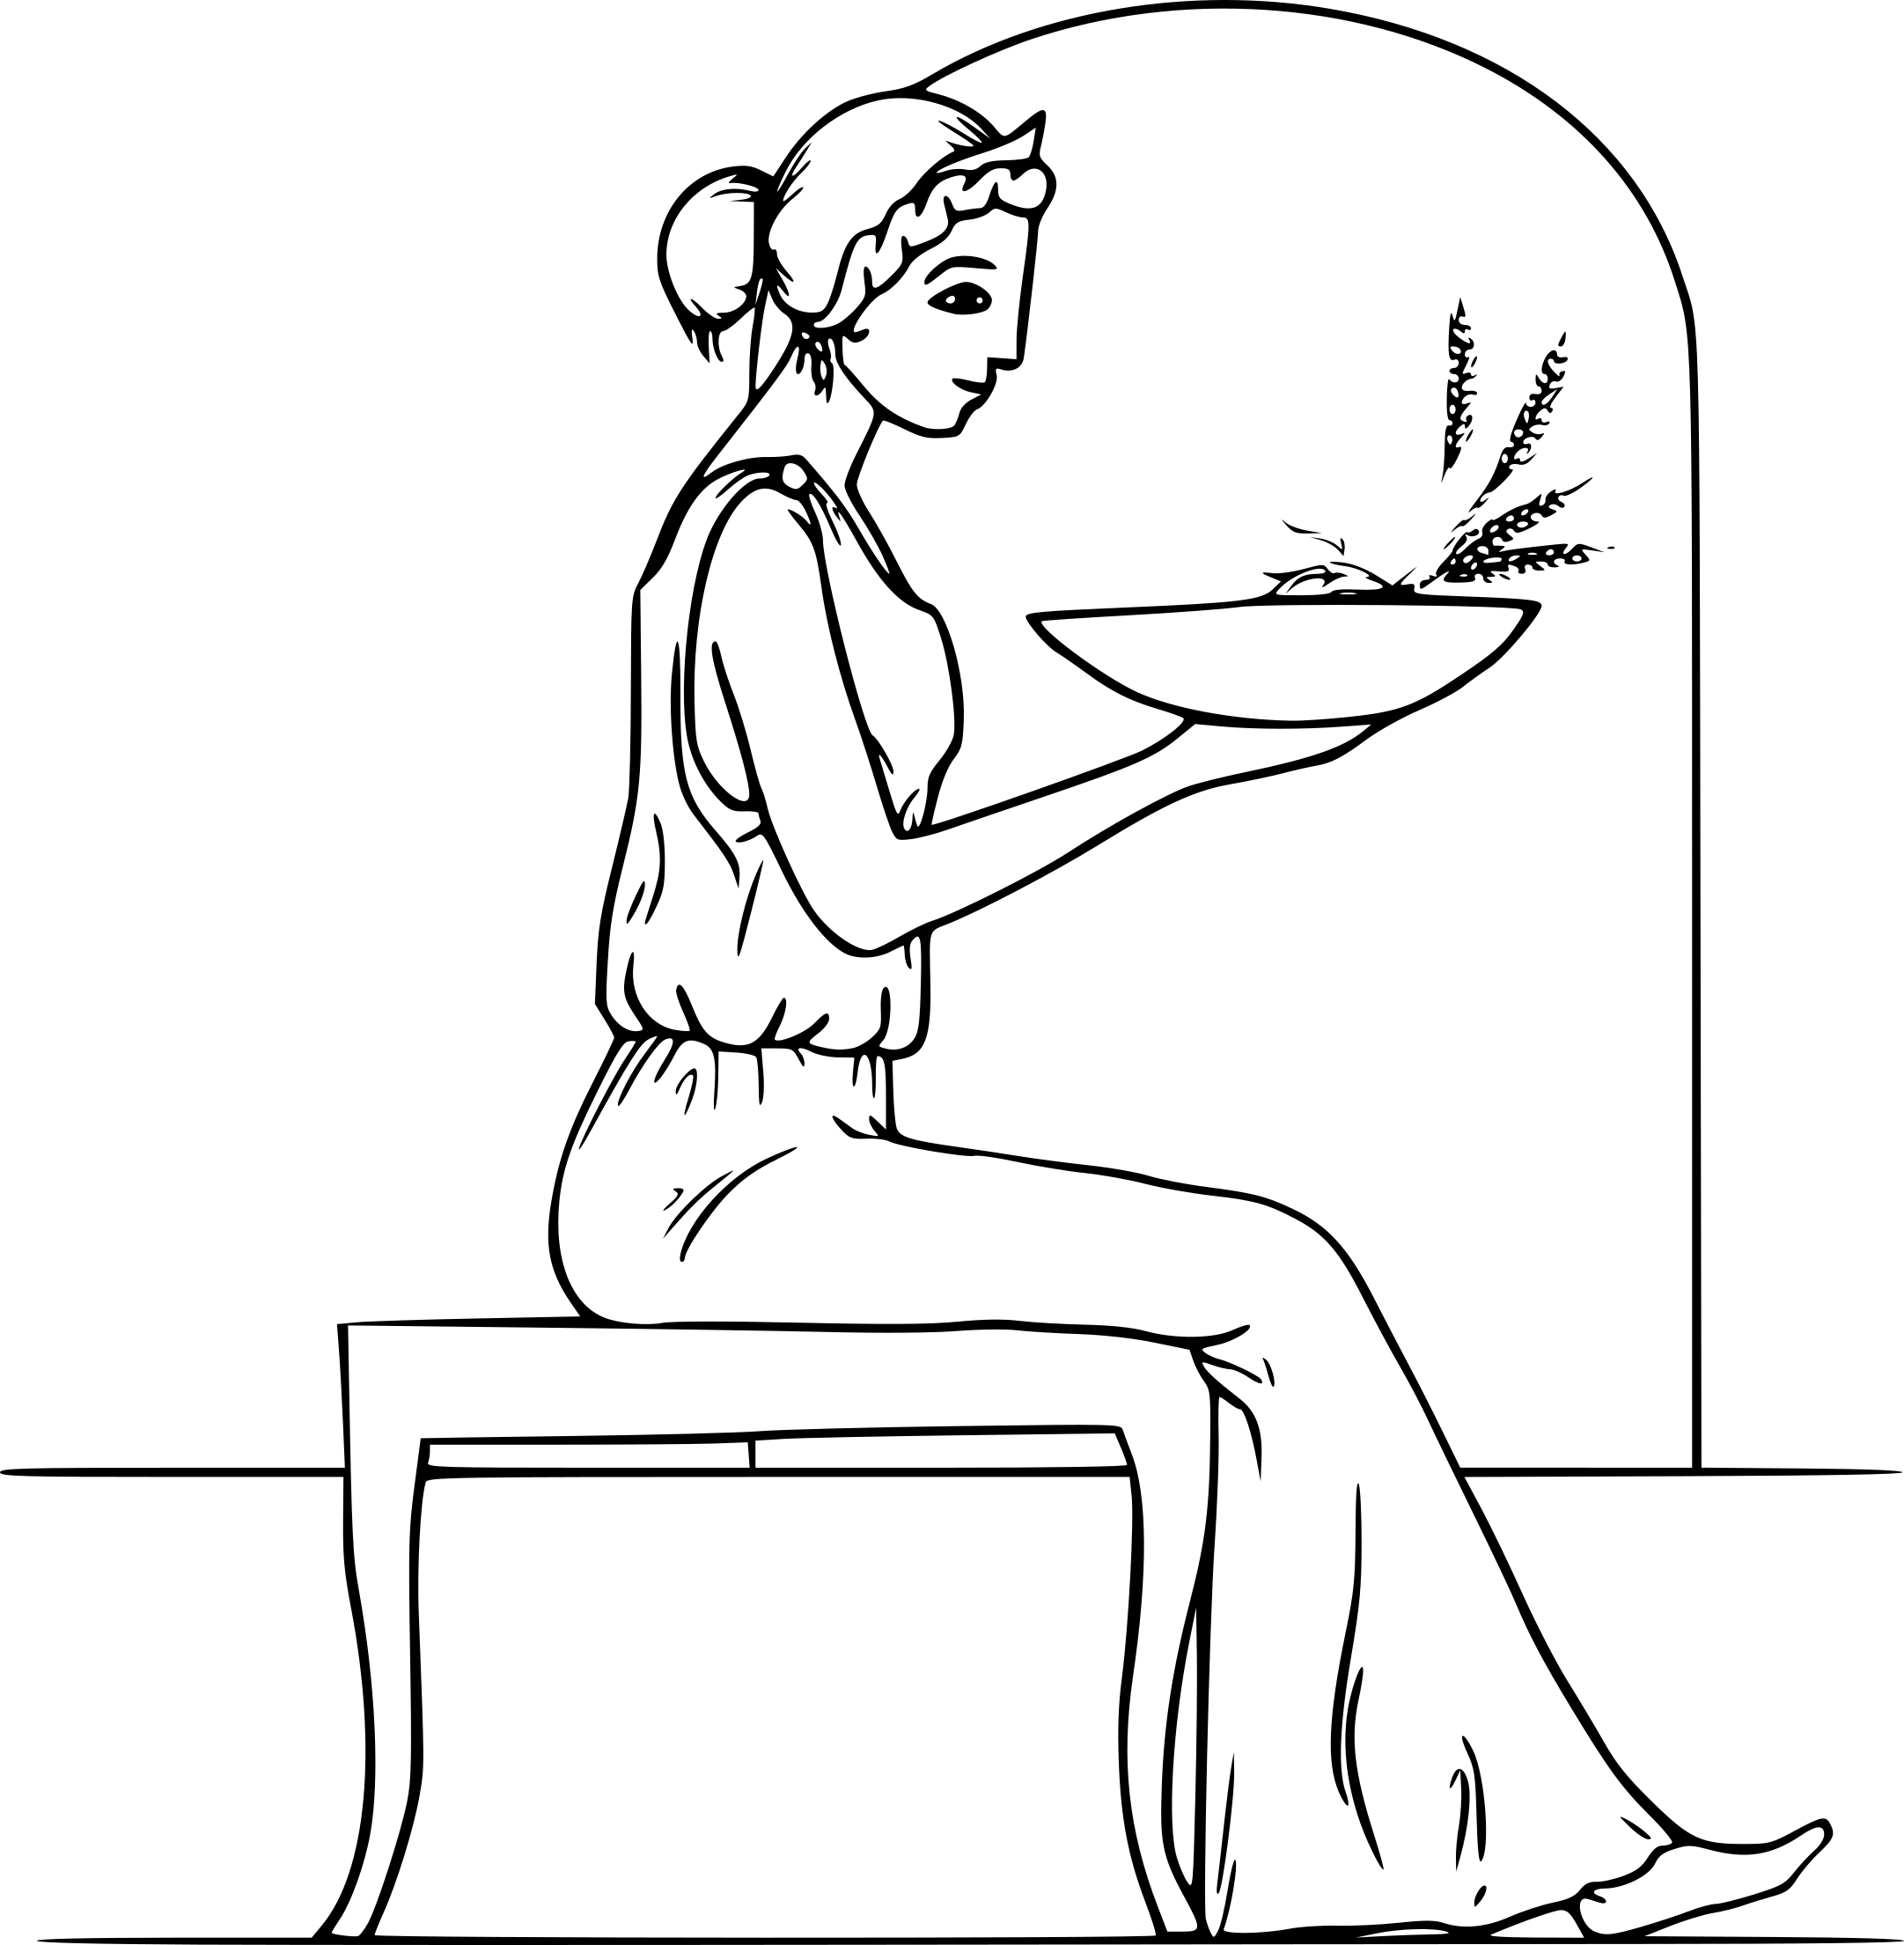 Demeter coloring page